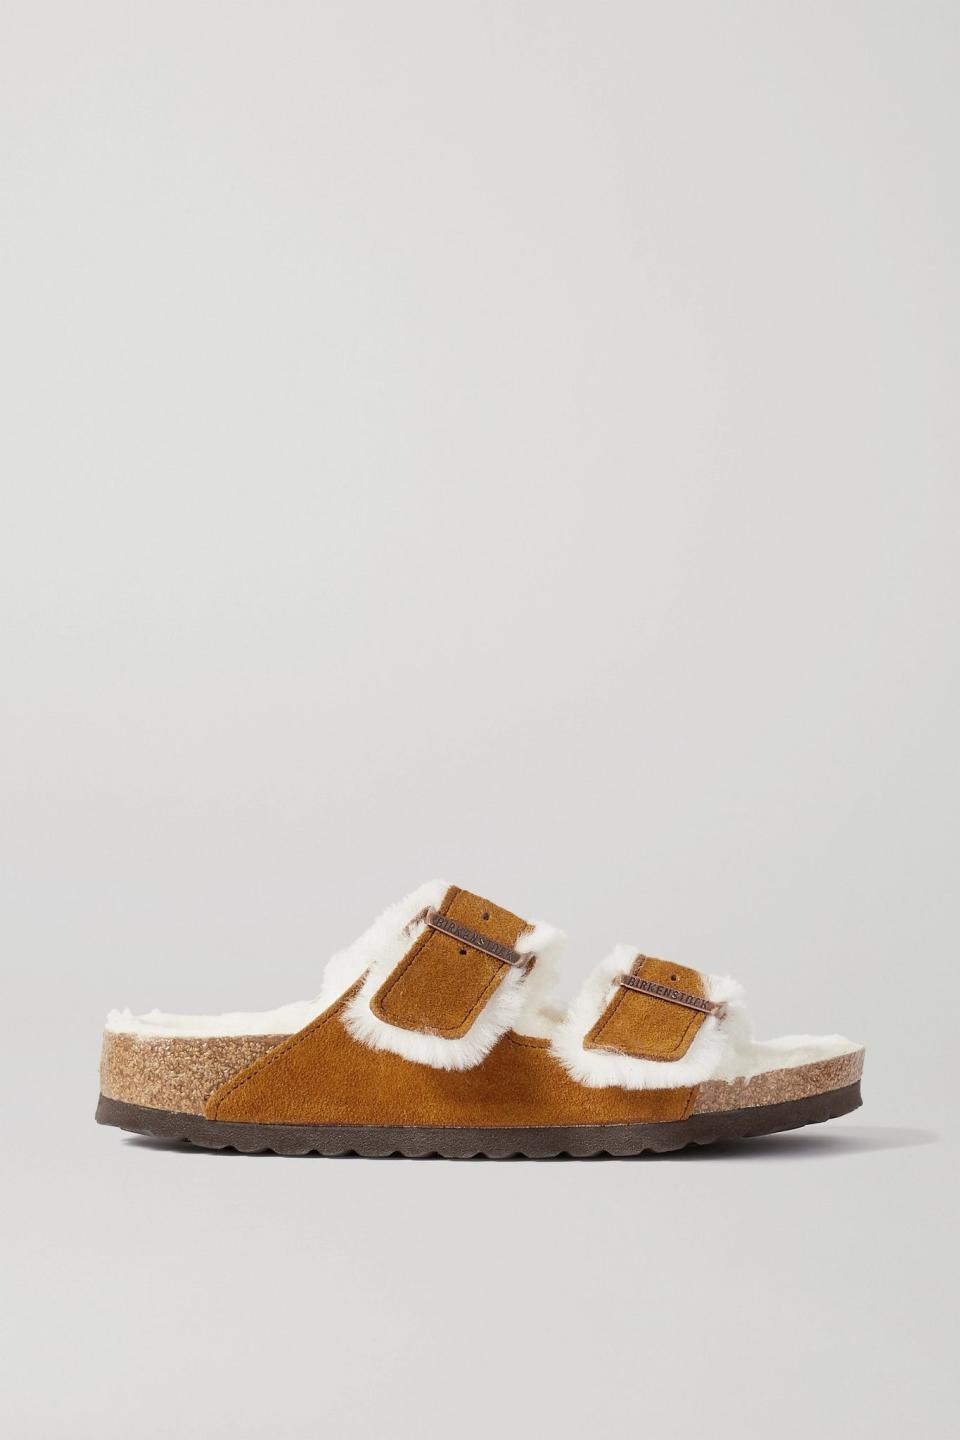 9) Arizona Shearling-Lined Suede Sandals